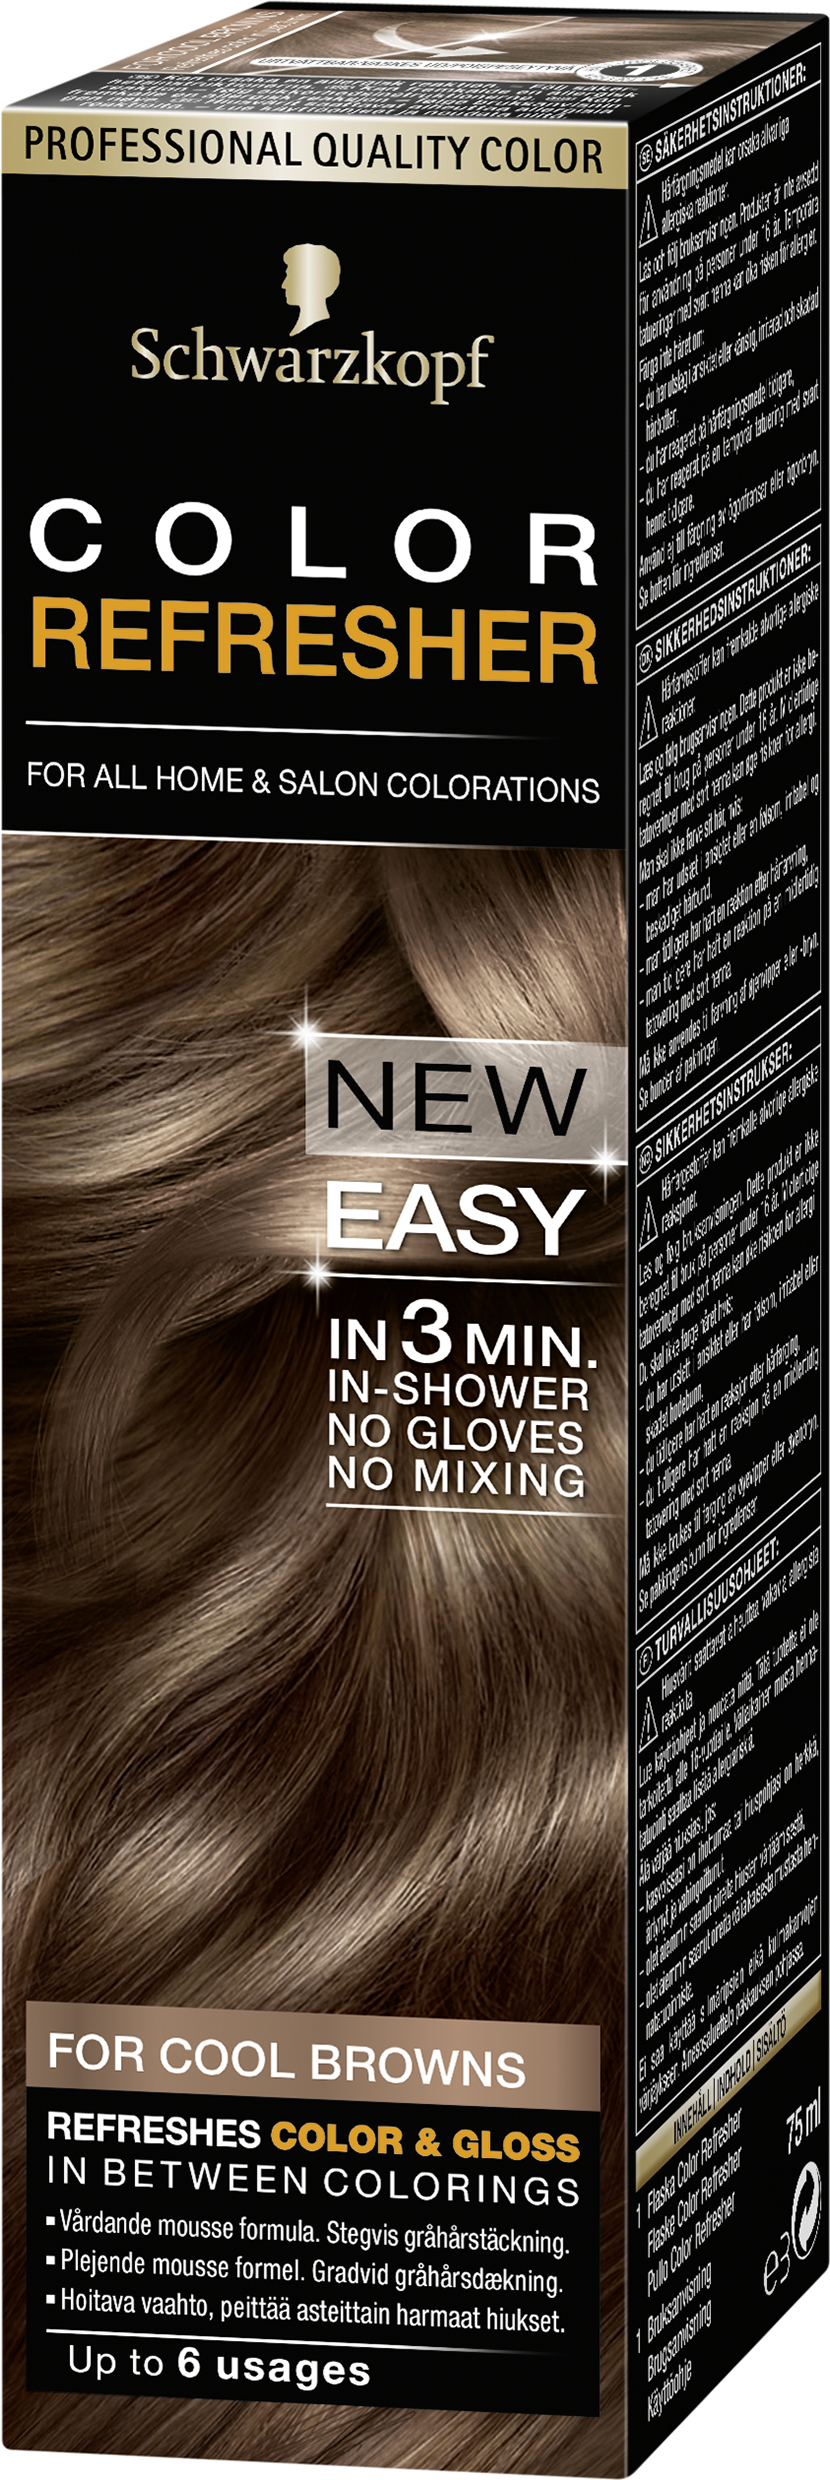 Schwarzkopf Color Refresher Mousse For Cool Browns 75ml